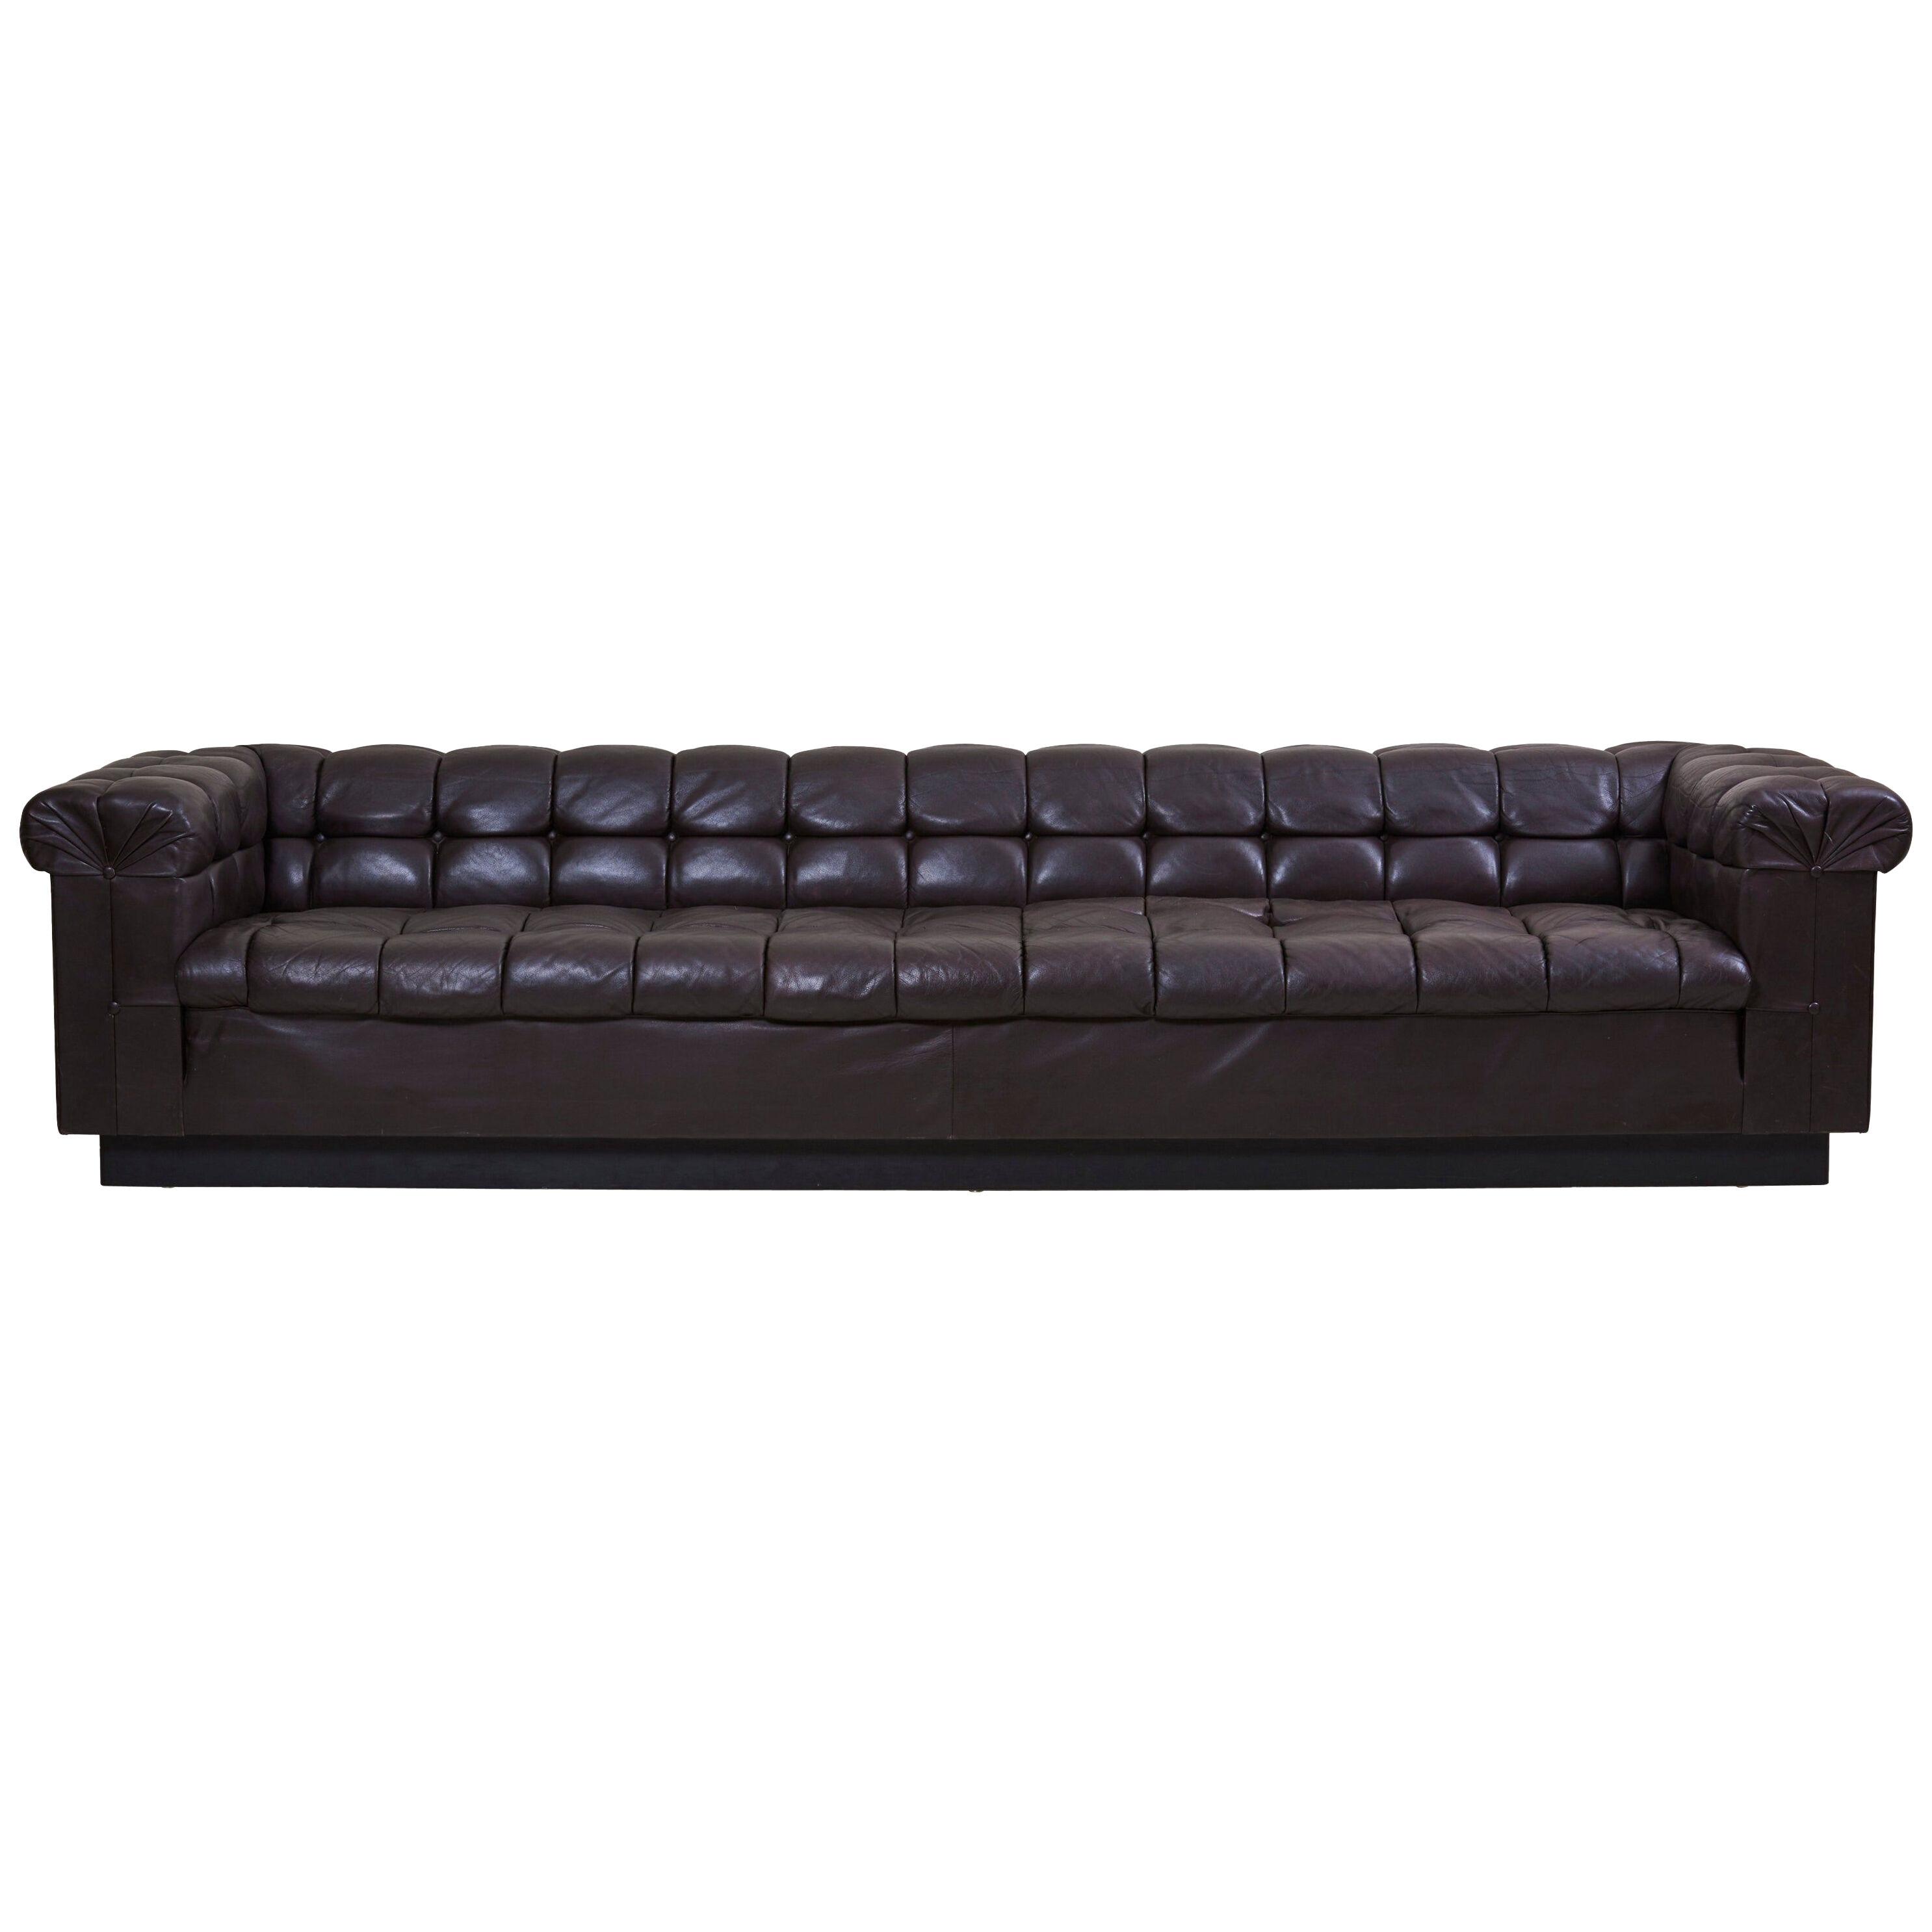 Party Sofa Model 5407 in Dark Brown Leather by Edward Wormley for Dunbar